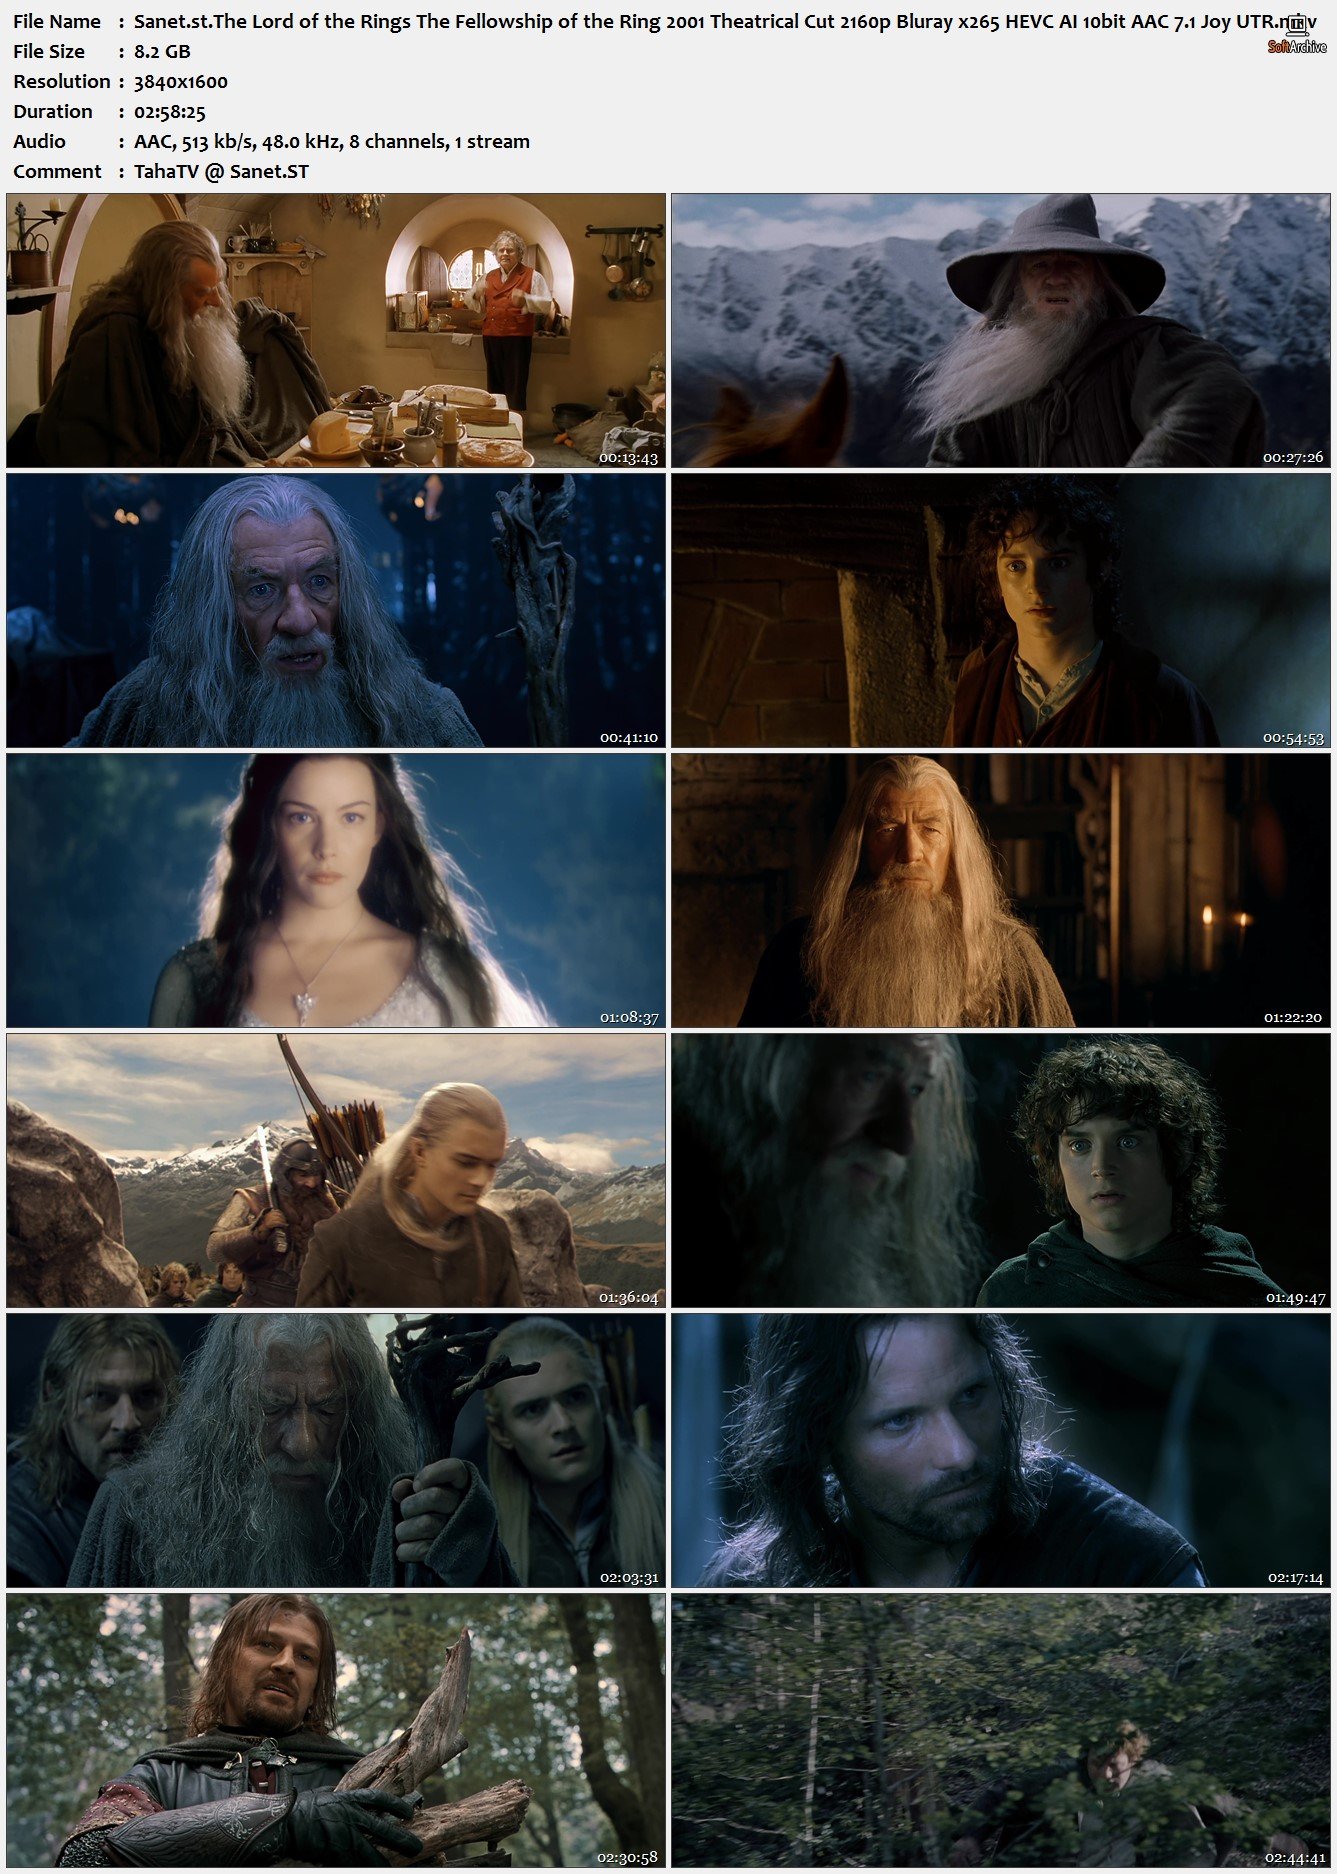 The Lord of the Rings: The Fellowship... download the last version for apple